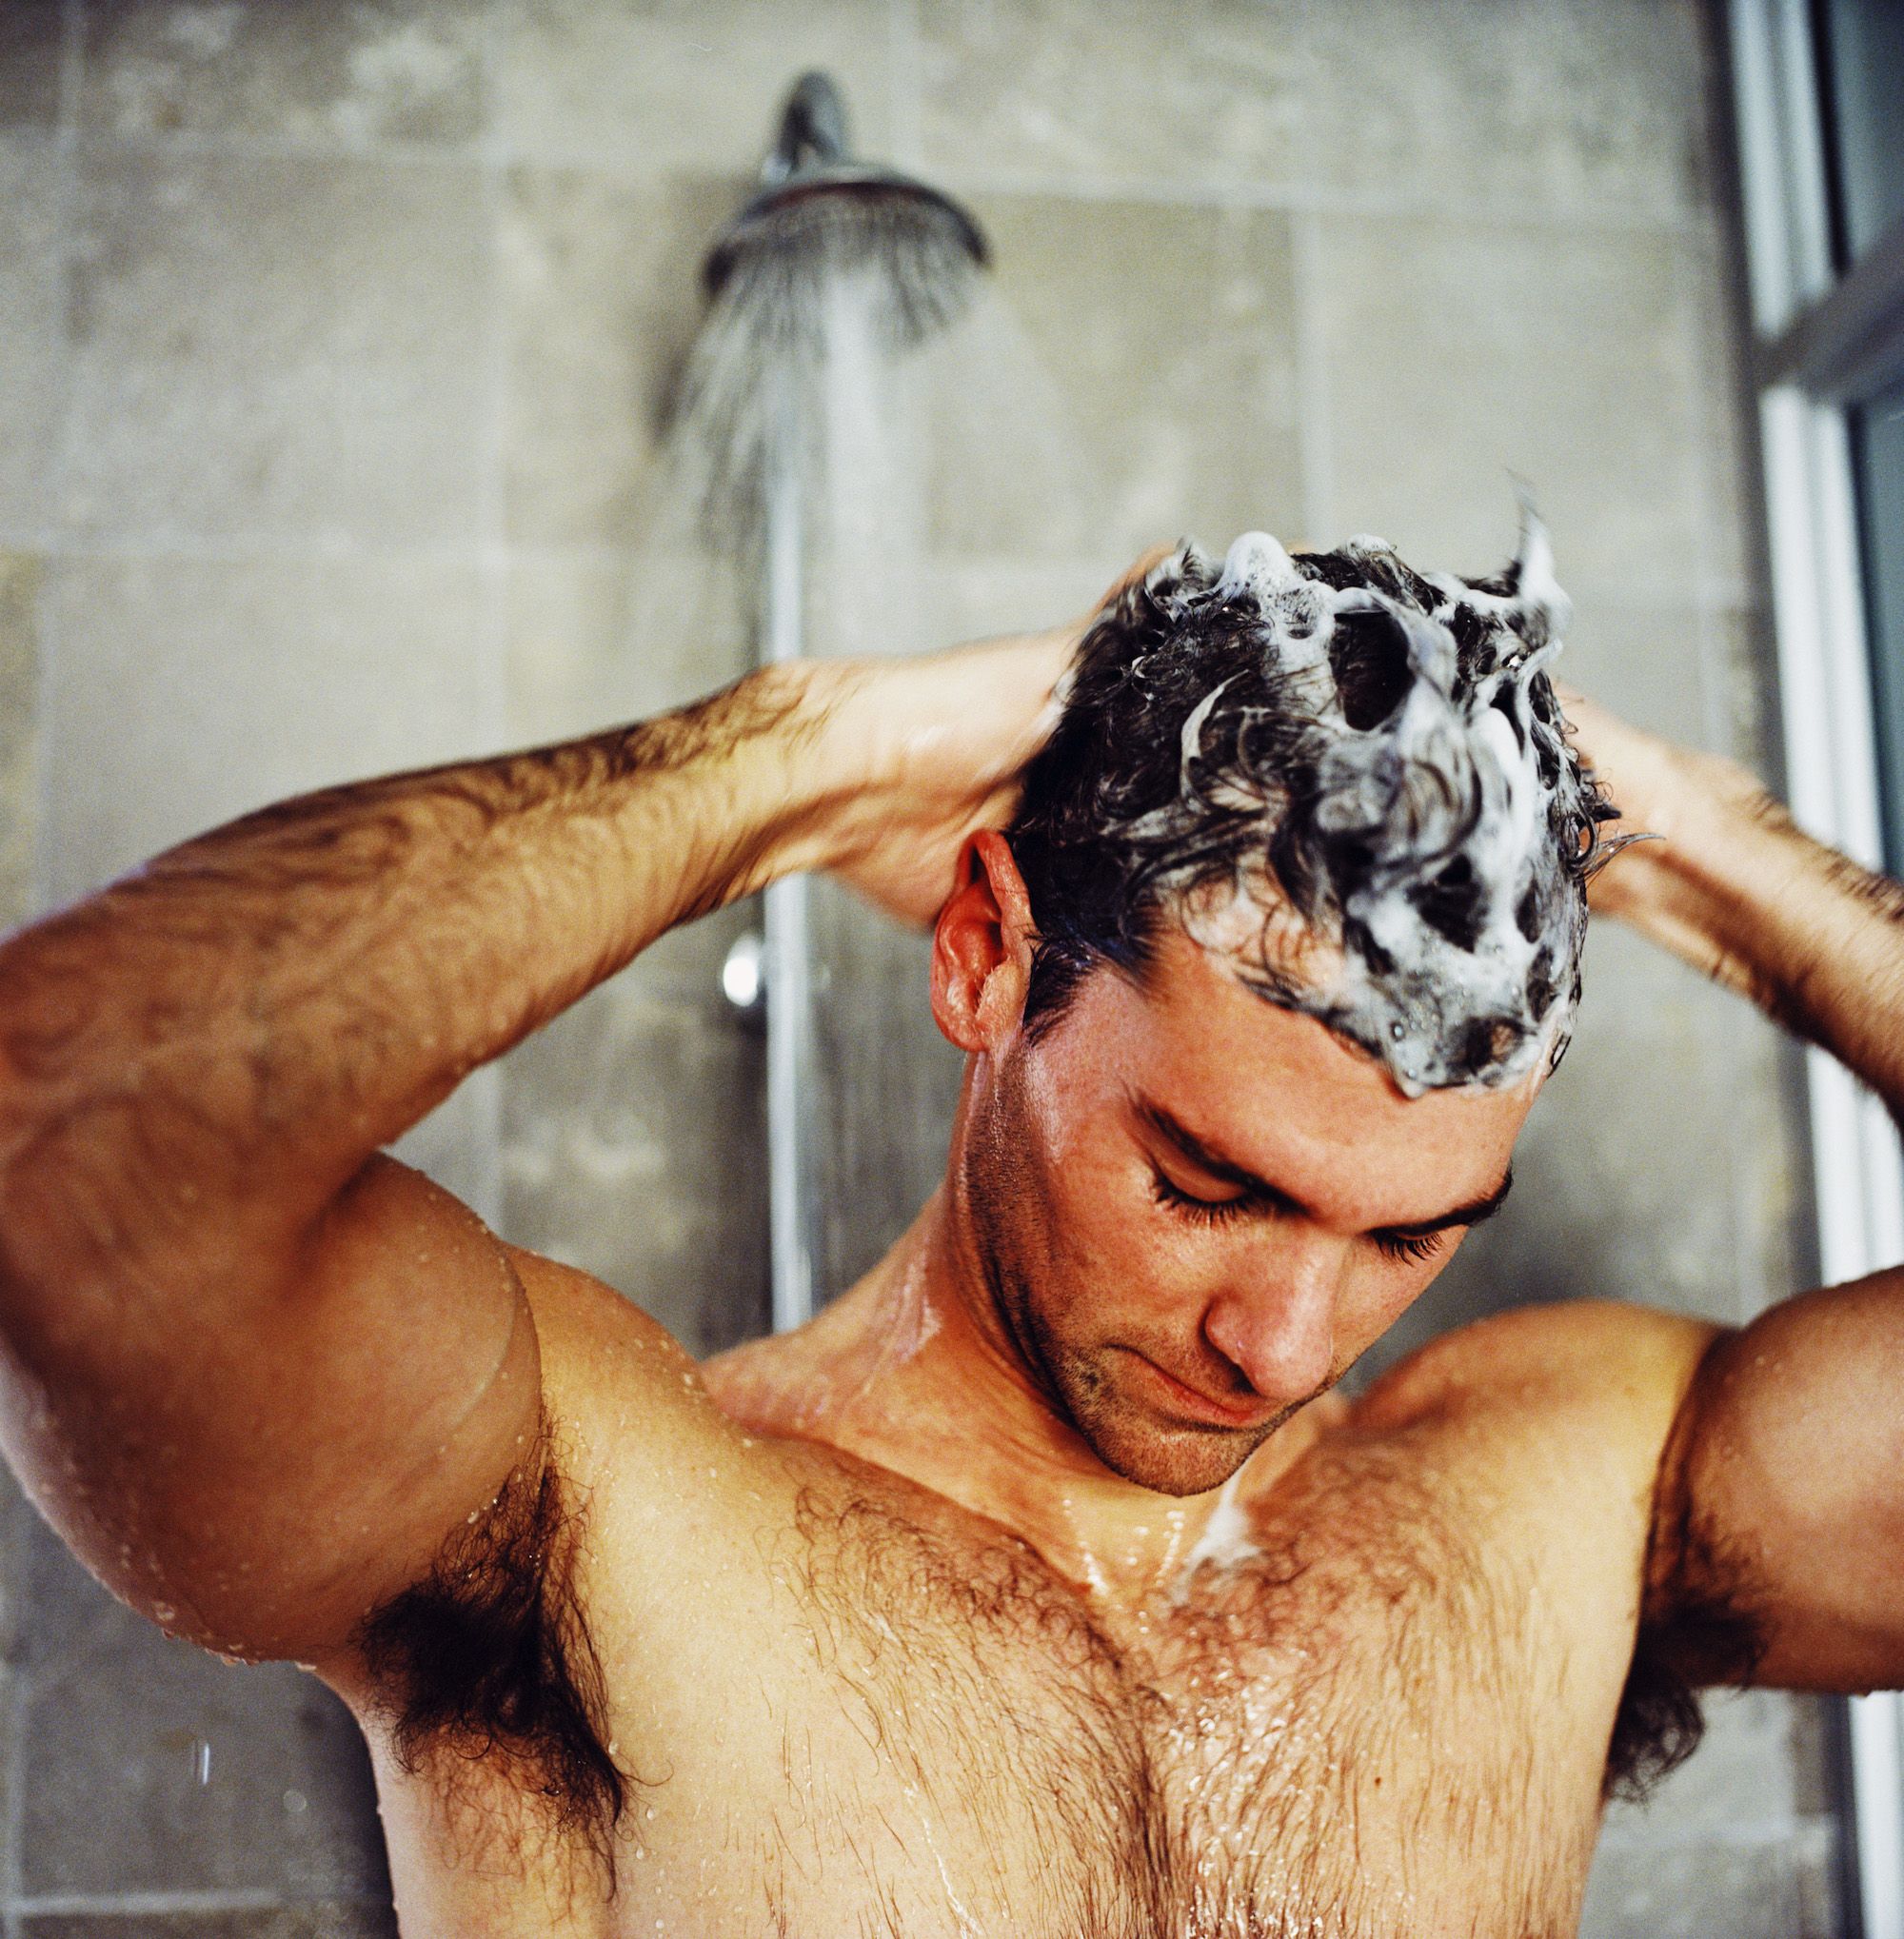 Is Washing Hair With Soap Instead Of Shampoo Bad?